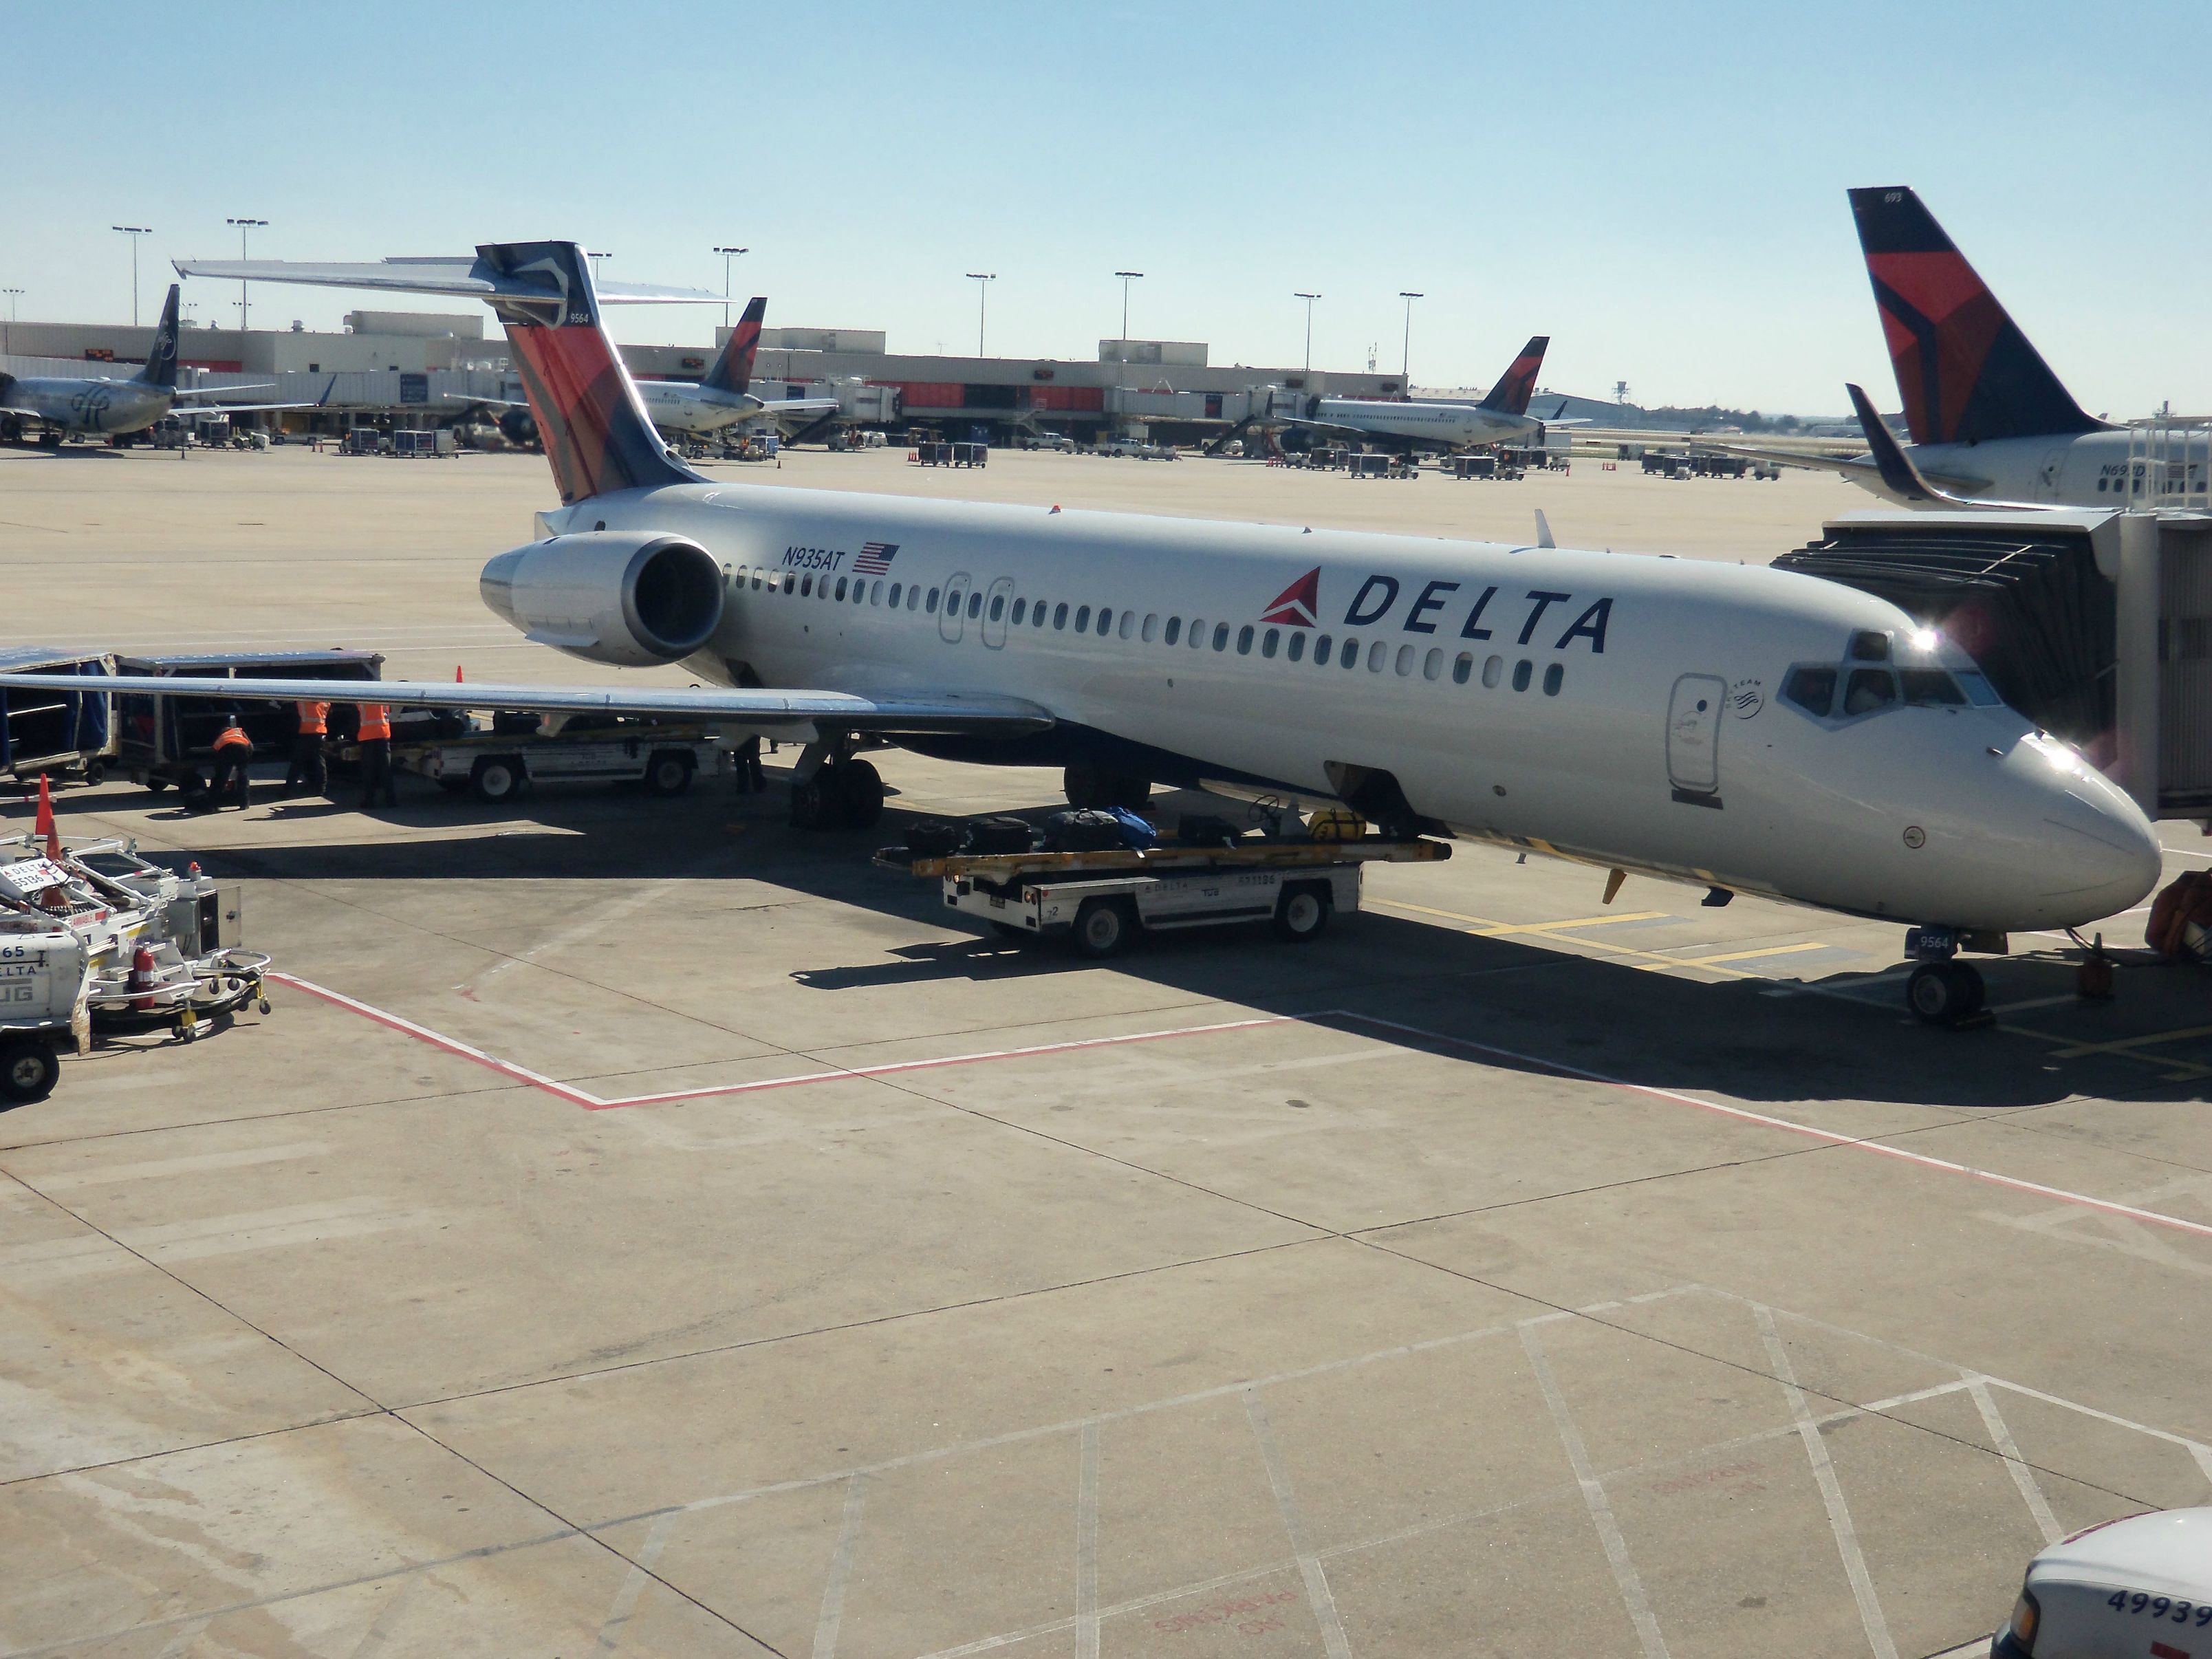                      Flight Review: Delta Air Lines (Boeing 717) Comfort+ From Denver to Seattle                             
                     